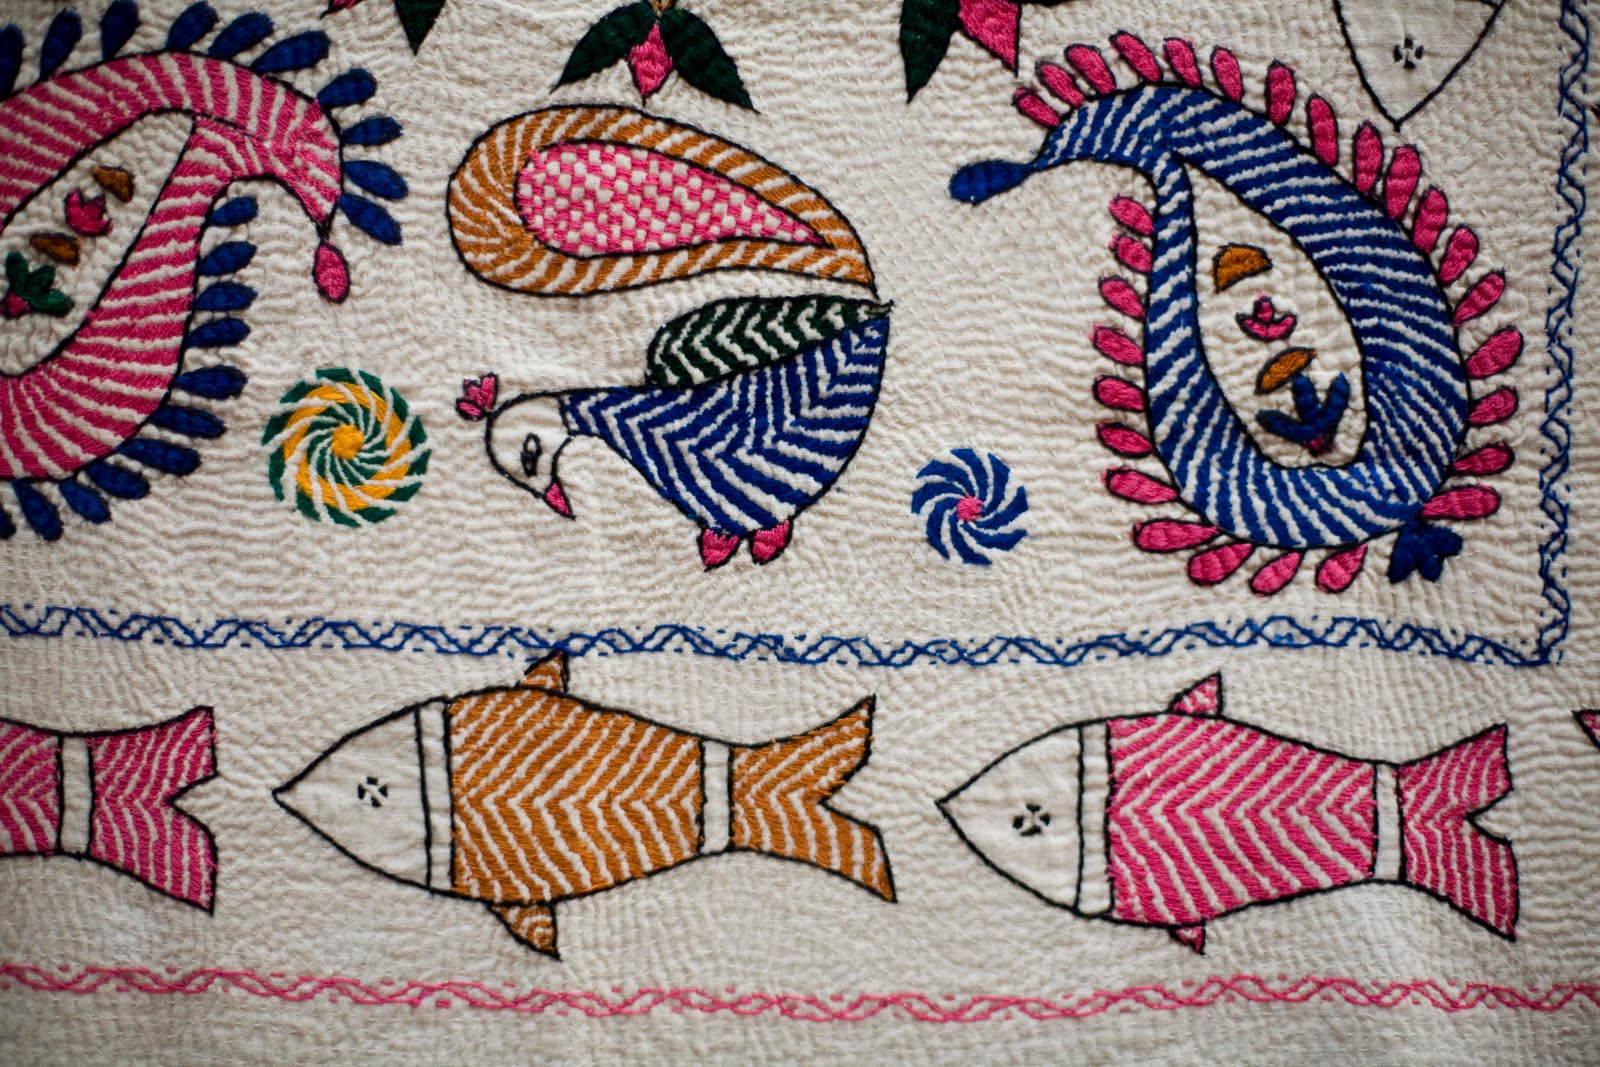 Fish Embroidery Patterns Kantha Traditional Embroidery From India Nidhi Saxenas Blog